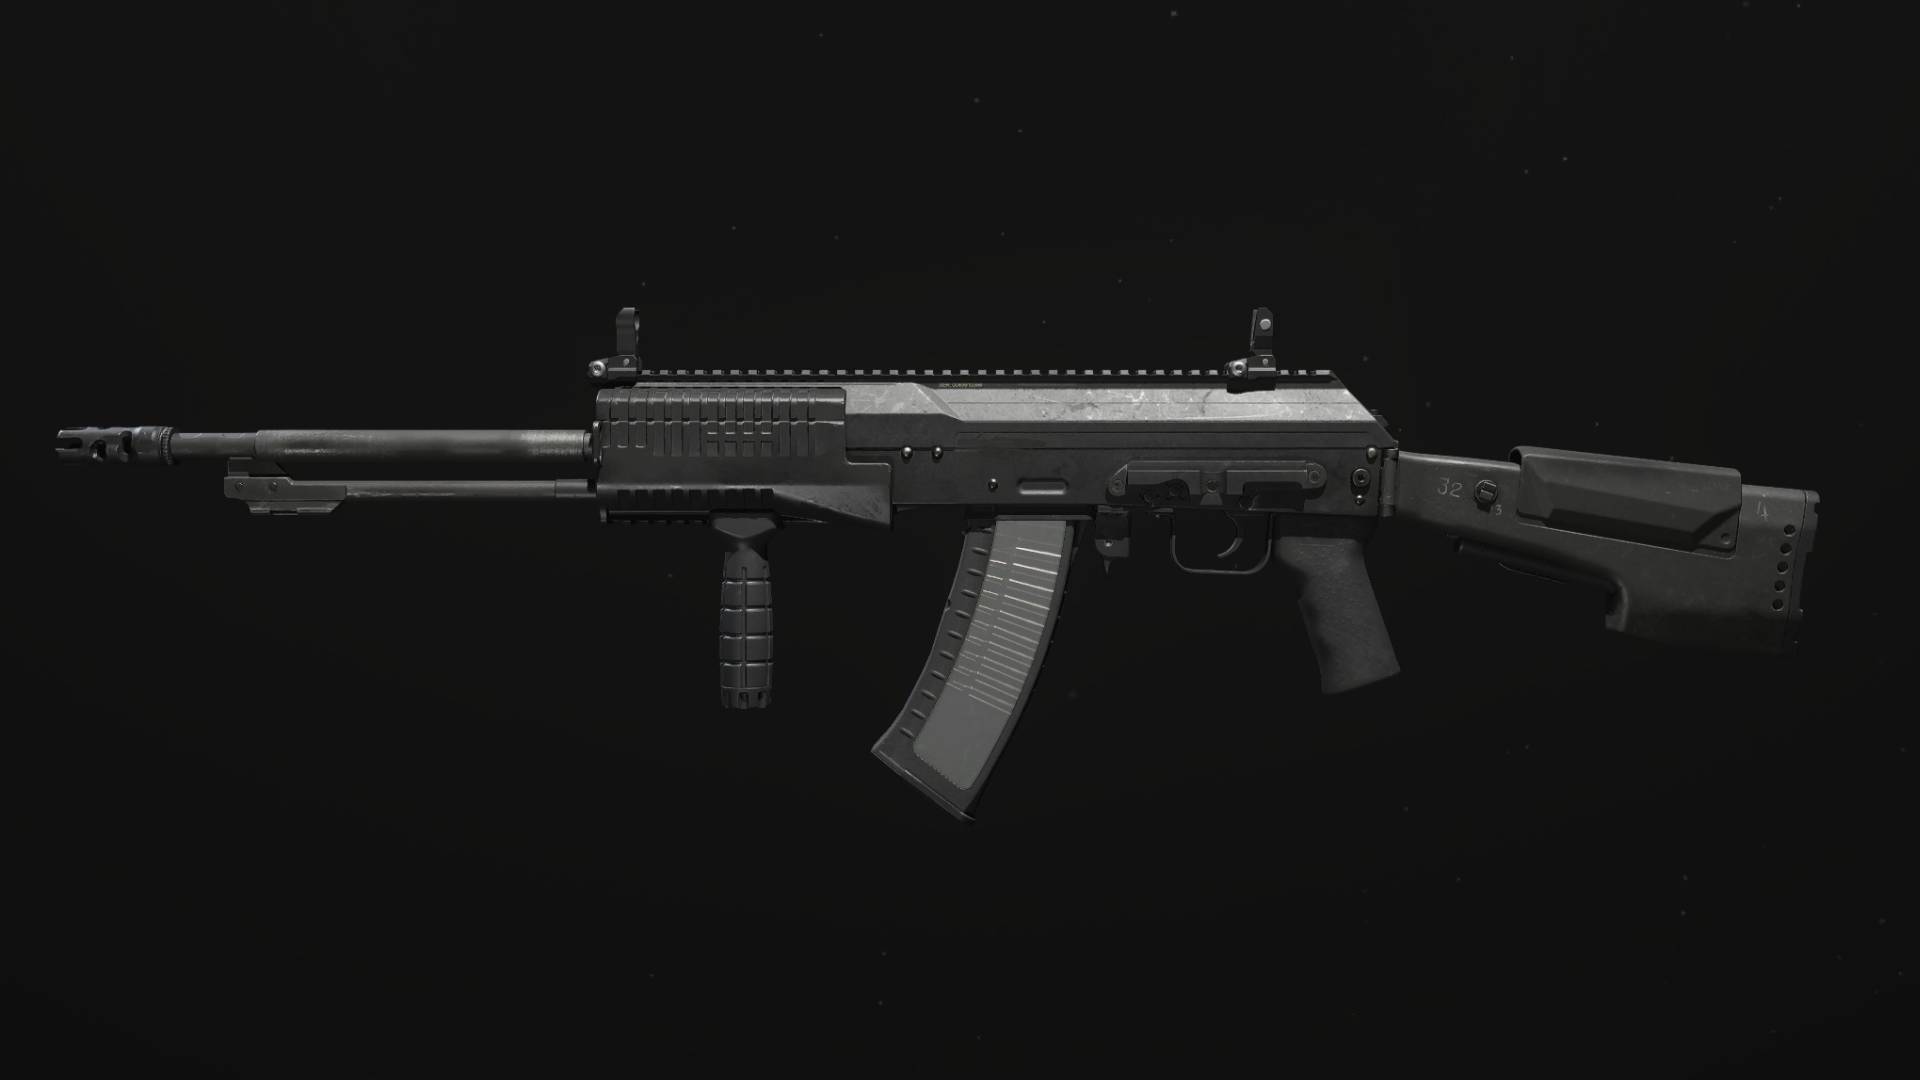 The SVA 545 sits against a black background in MW3.